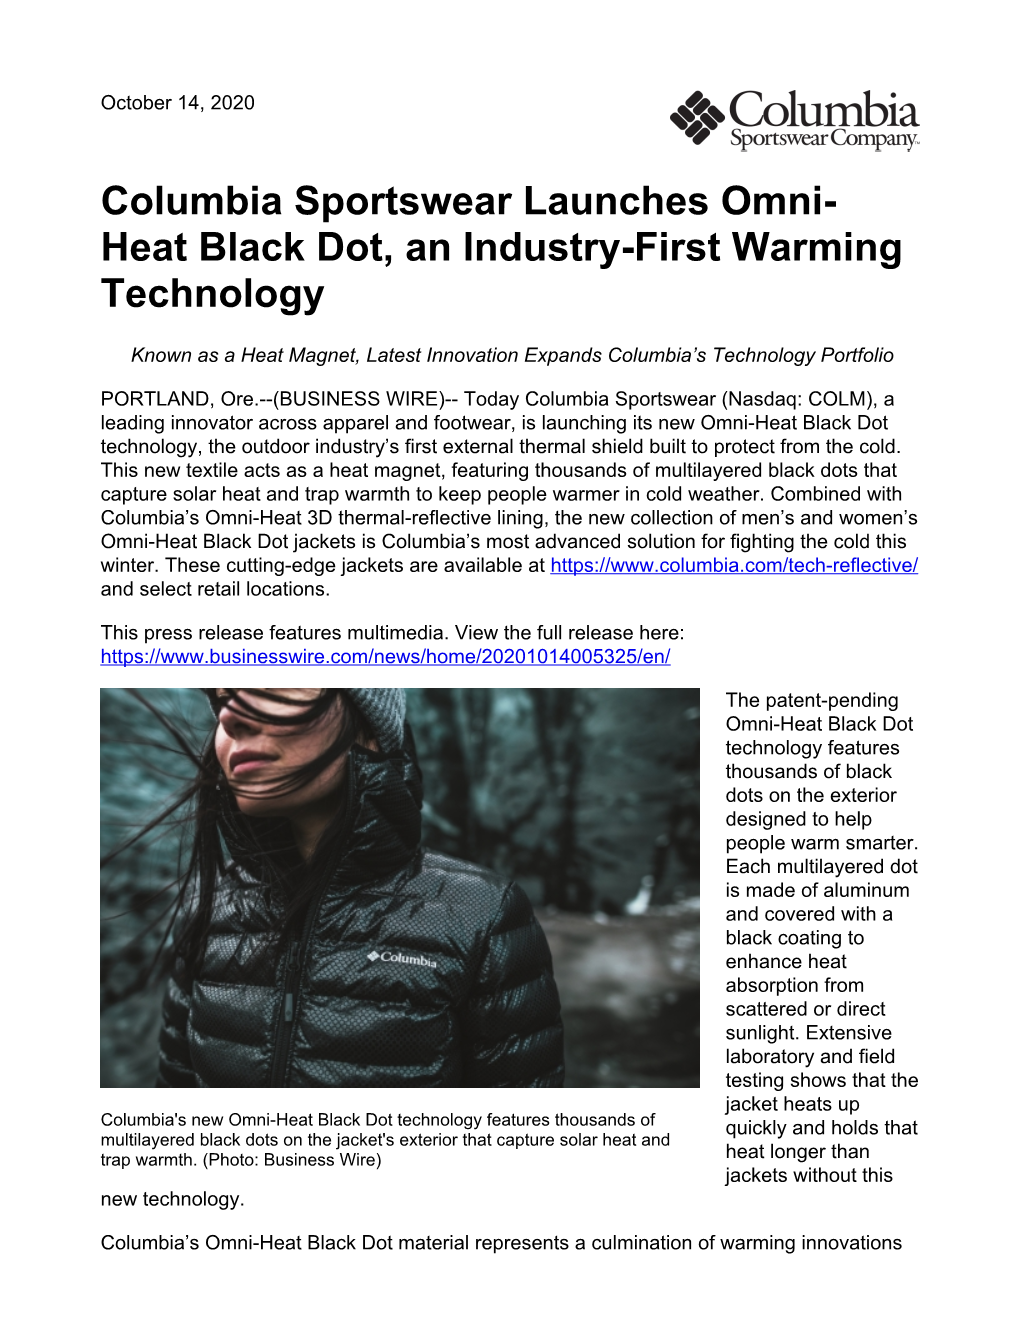 Columbia Sportswear Launches Omni- Heat Black Dot, an Industry-First Warming Technology